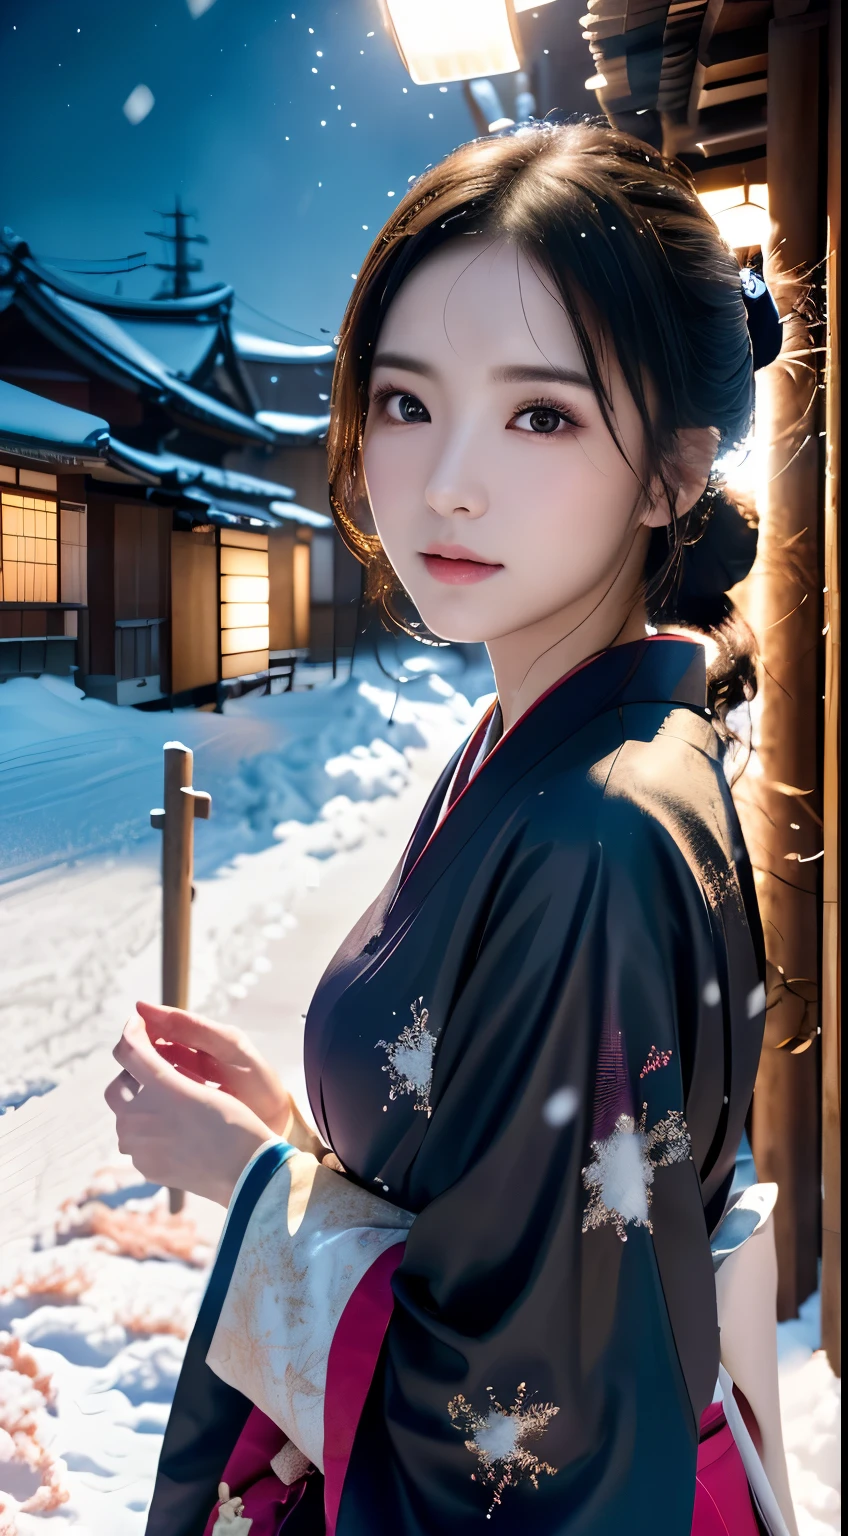 (Kimono)、(without makeup)、(top-quality,​masterpiece:1.3,超A high resolution,),(ultra-detailliert,Caustics),(Photorealsitic:1.4,RAW shooting,)Ultra-realistic capture,A highly detailed,high-definition16Kfor human skin、 Skin texture is natural、、The skin looks healthy with an even tone、 Use natural light and color,One Woman,japanes,,kawaii,A dark-haired,Middle hair,(depth of fields、chromatic abberation、、Wide range of lighting、Natural Shading、)、、(Exterior light at night:1.4)、(Falling snow:1.2)、(Hair swaying in the wind:1)、(Snow reflects light:1.3)